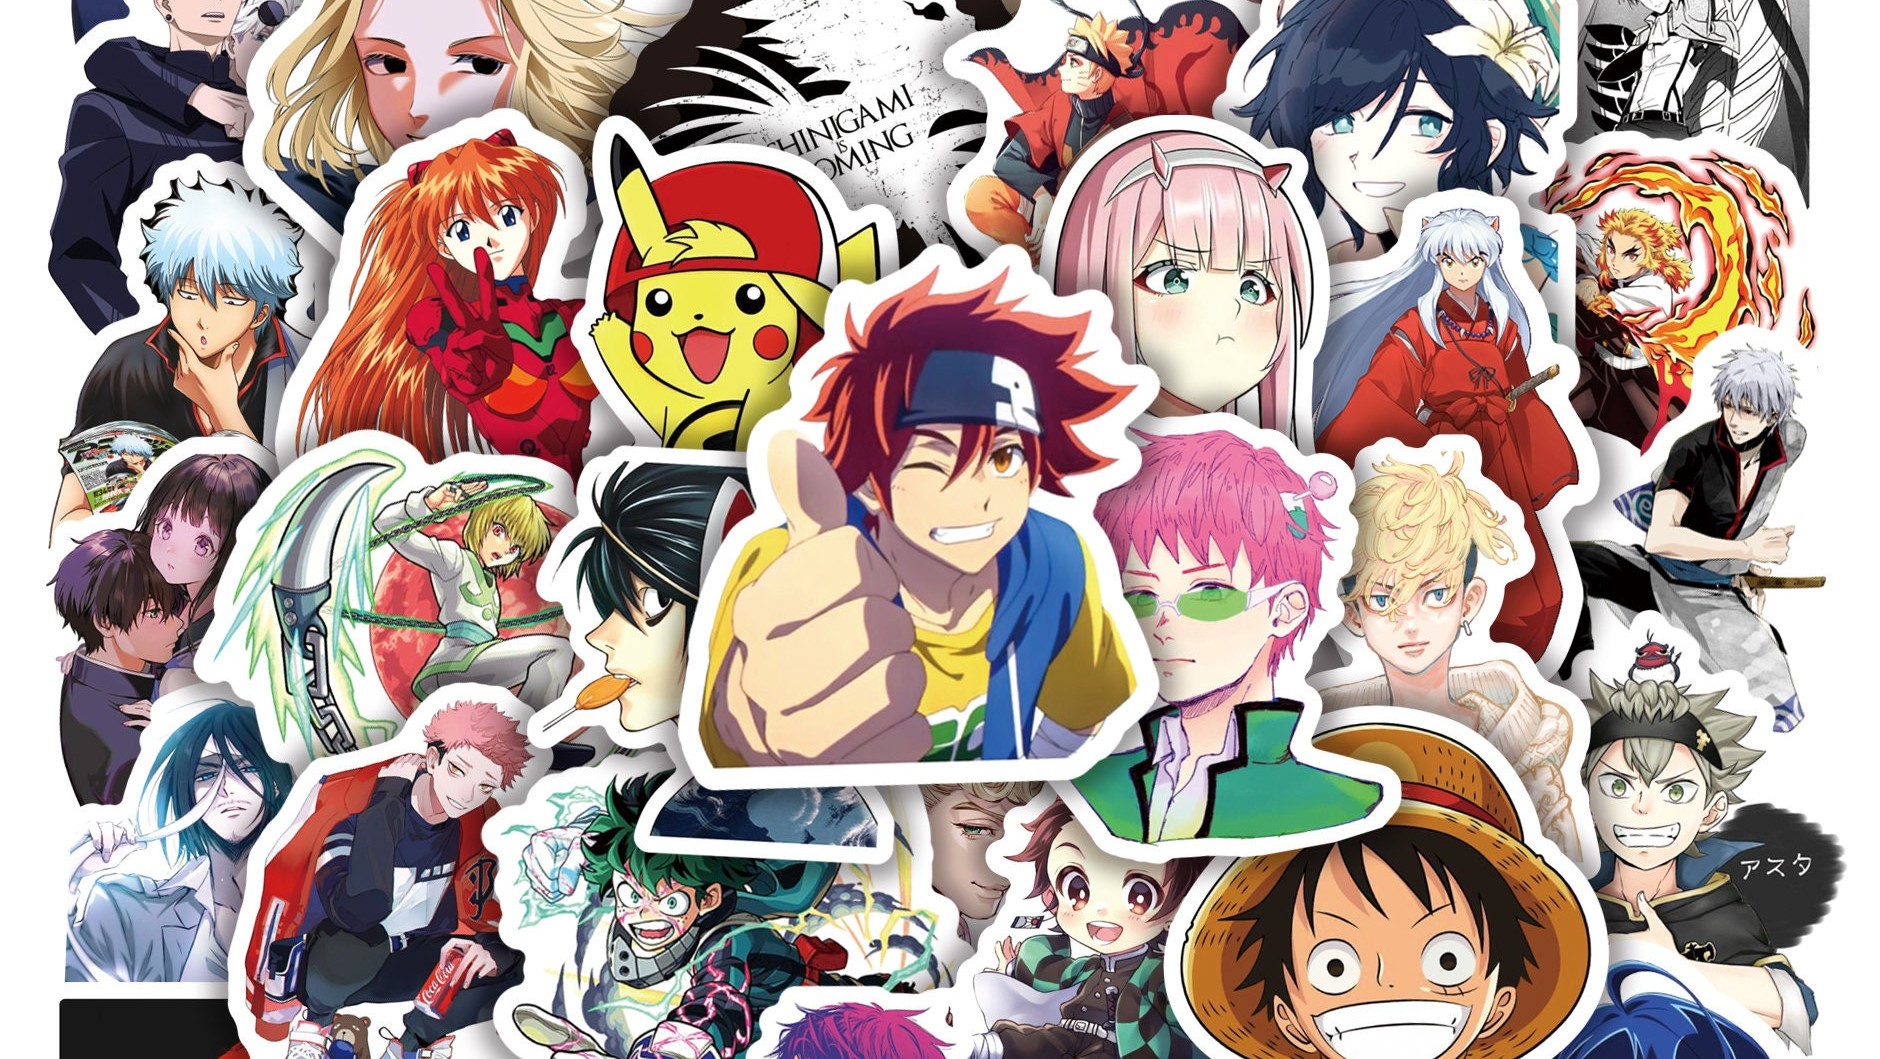 Level Up Your Style: Video Game and Anime Stickers to Decorate Your Stuff -  Culture of Gaming